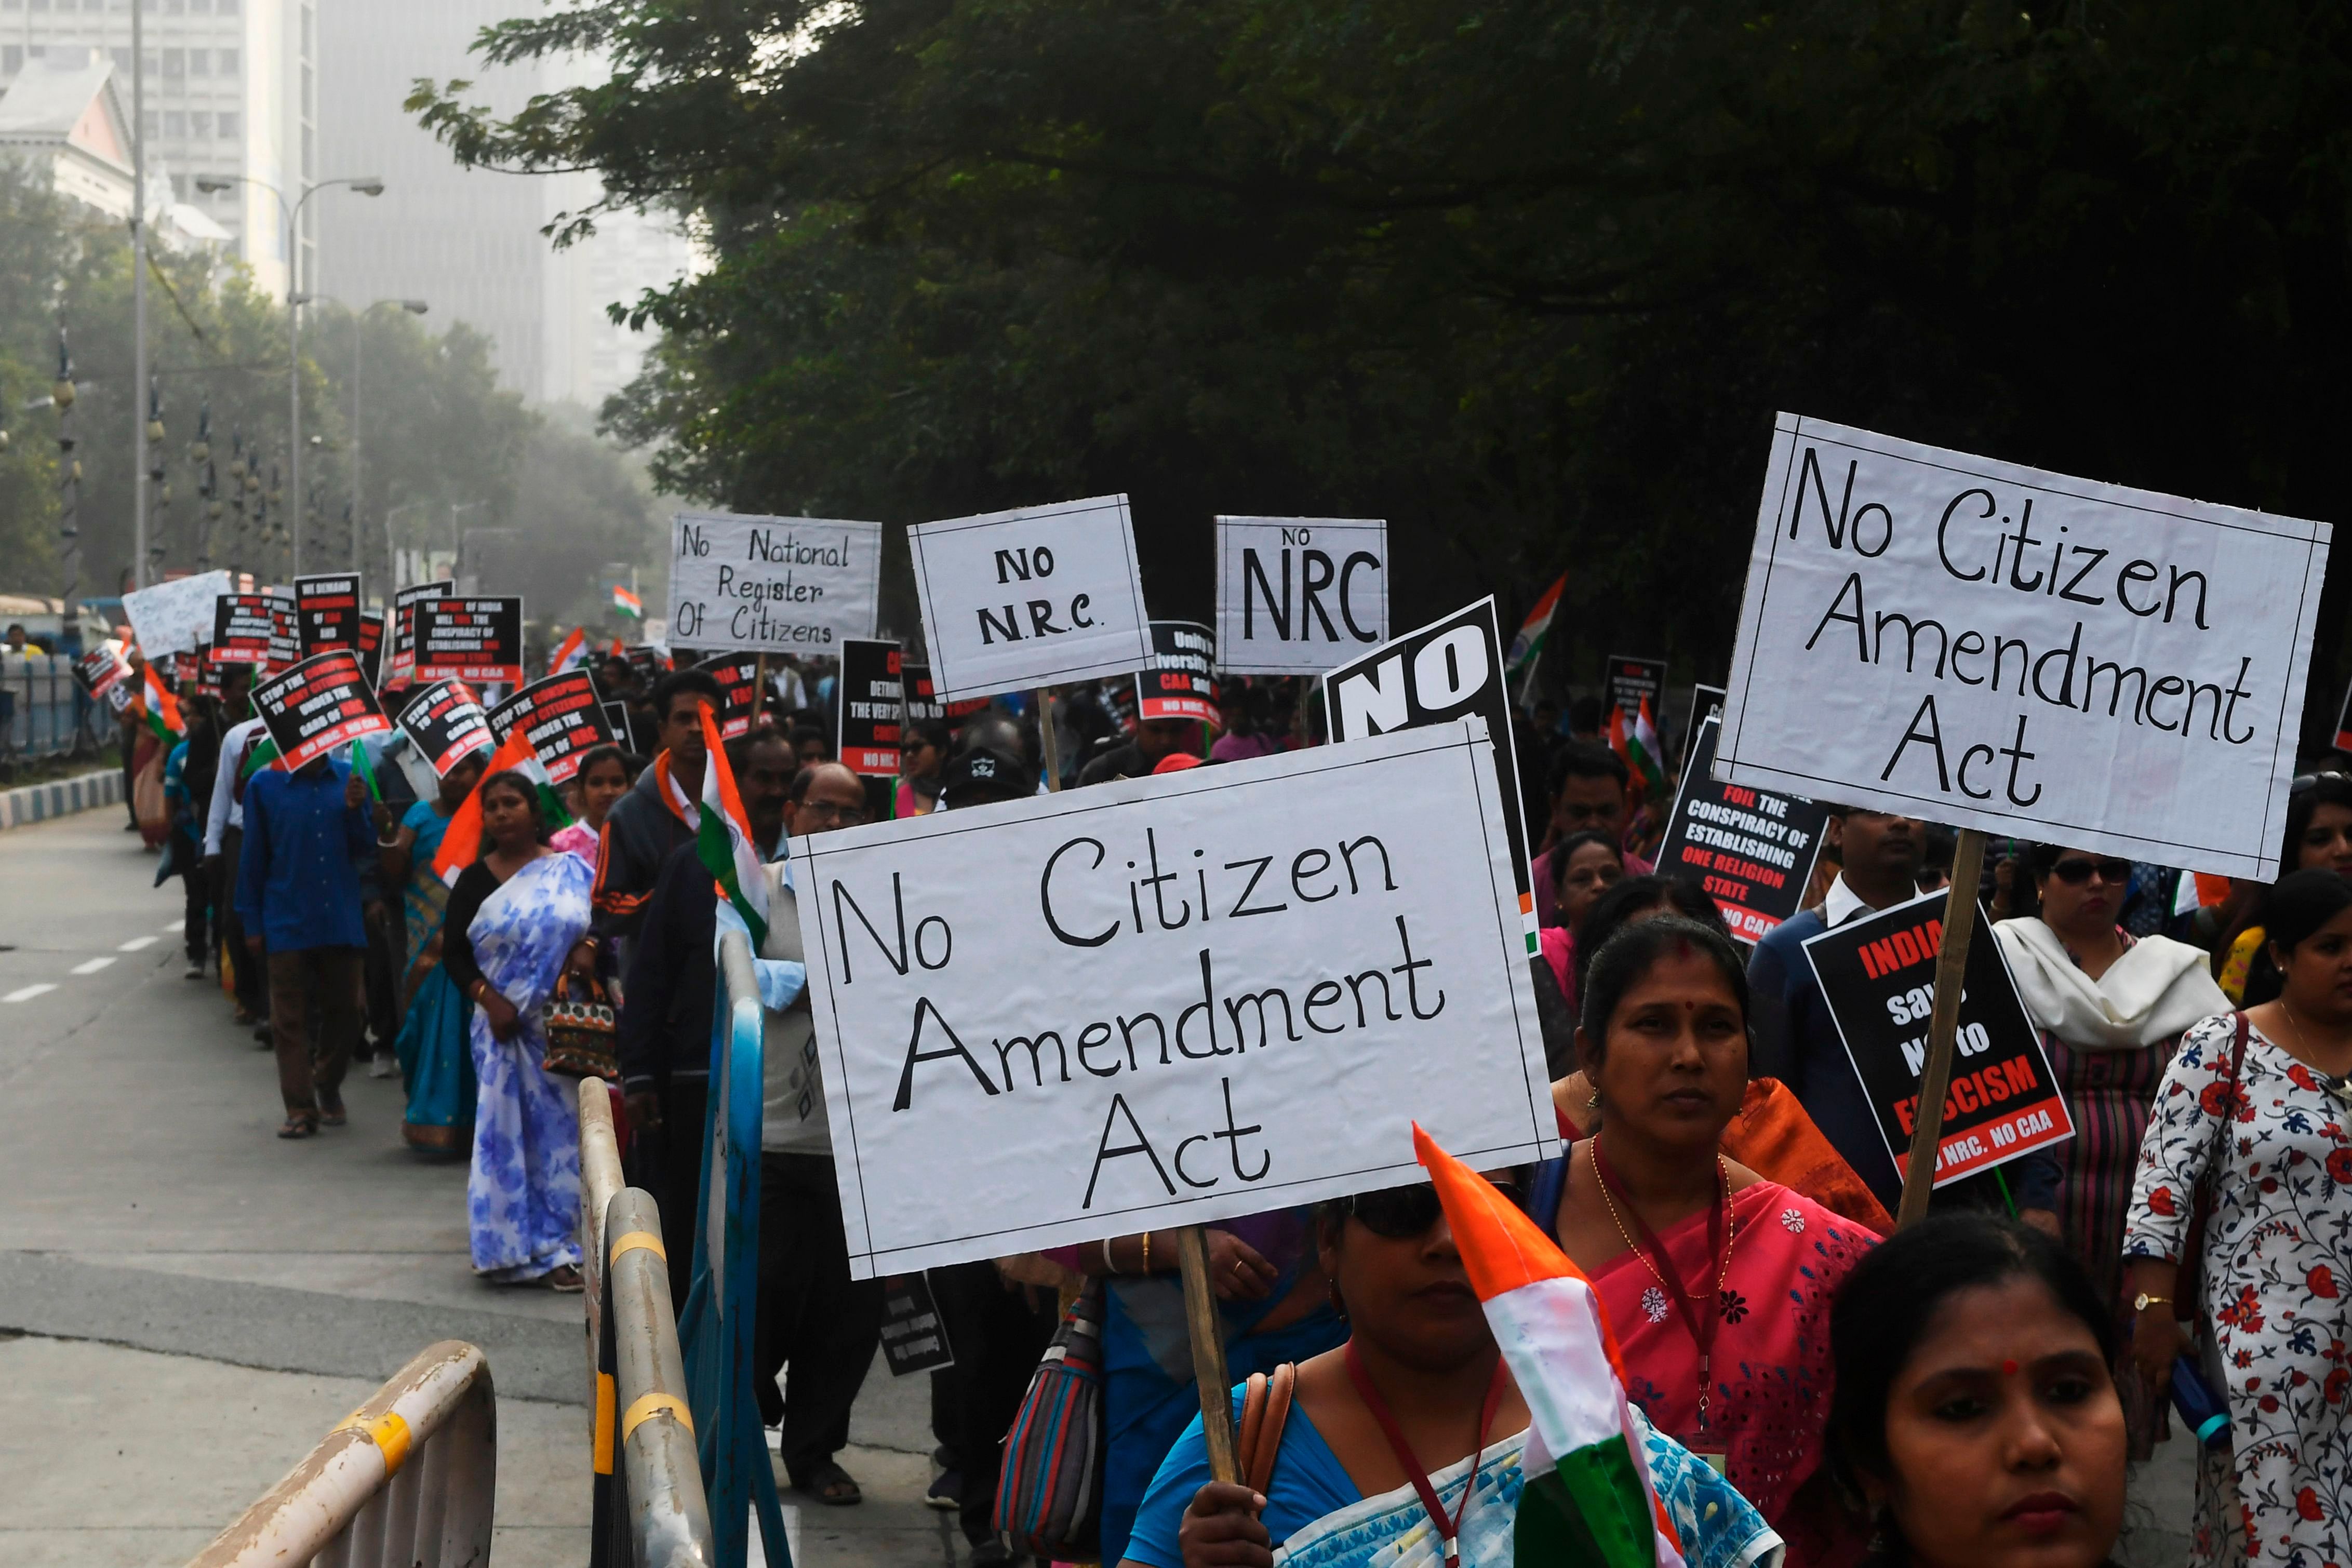 Members of the Christian community along with social activists hold placards and Indian flags as they take part in a rally to protests against the Indian government's Citizenship Amendment Act (CAA), in Kolkata. (PTI Photo)